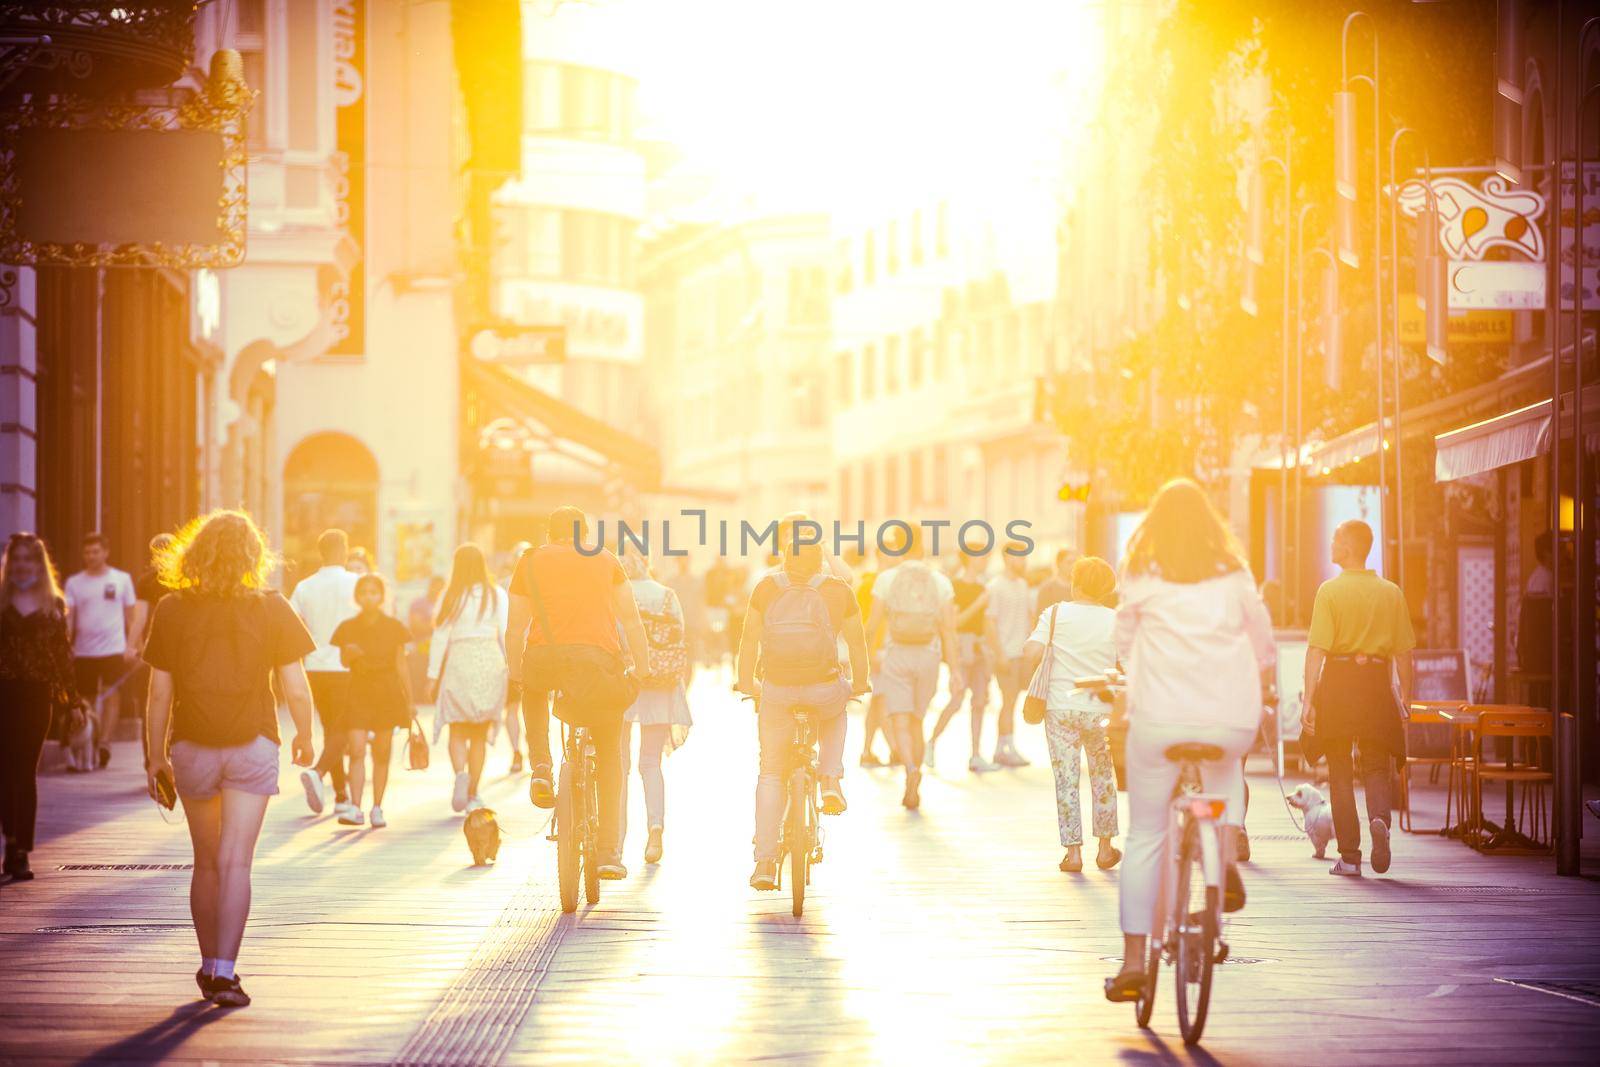 Blurred crowd of people on Copova pedestrian street in Ljubljana at sunset. Urban lifestyle and mobility concept. by kasto